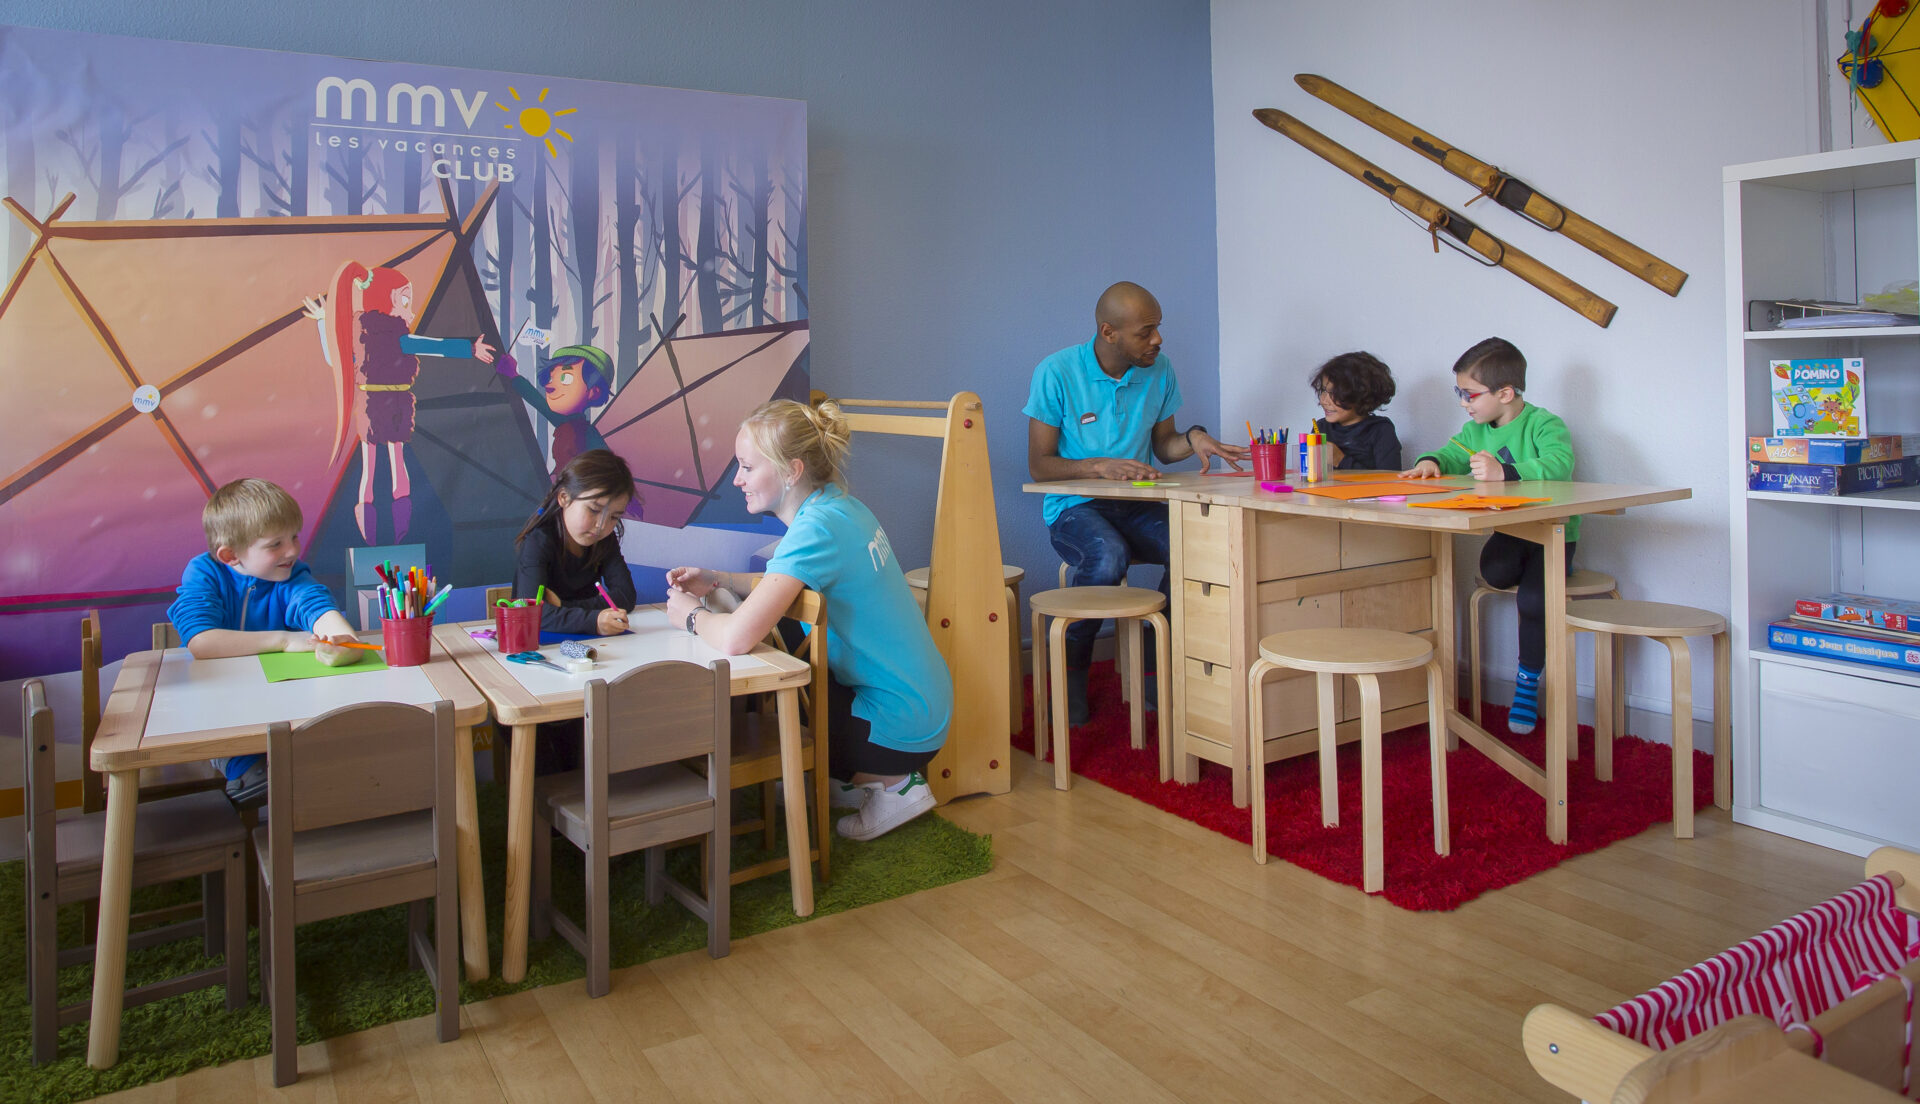 The kids club at Hotel Club MMV Le Panorama